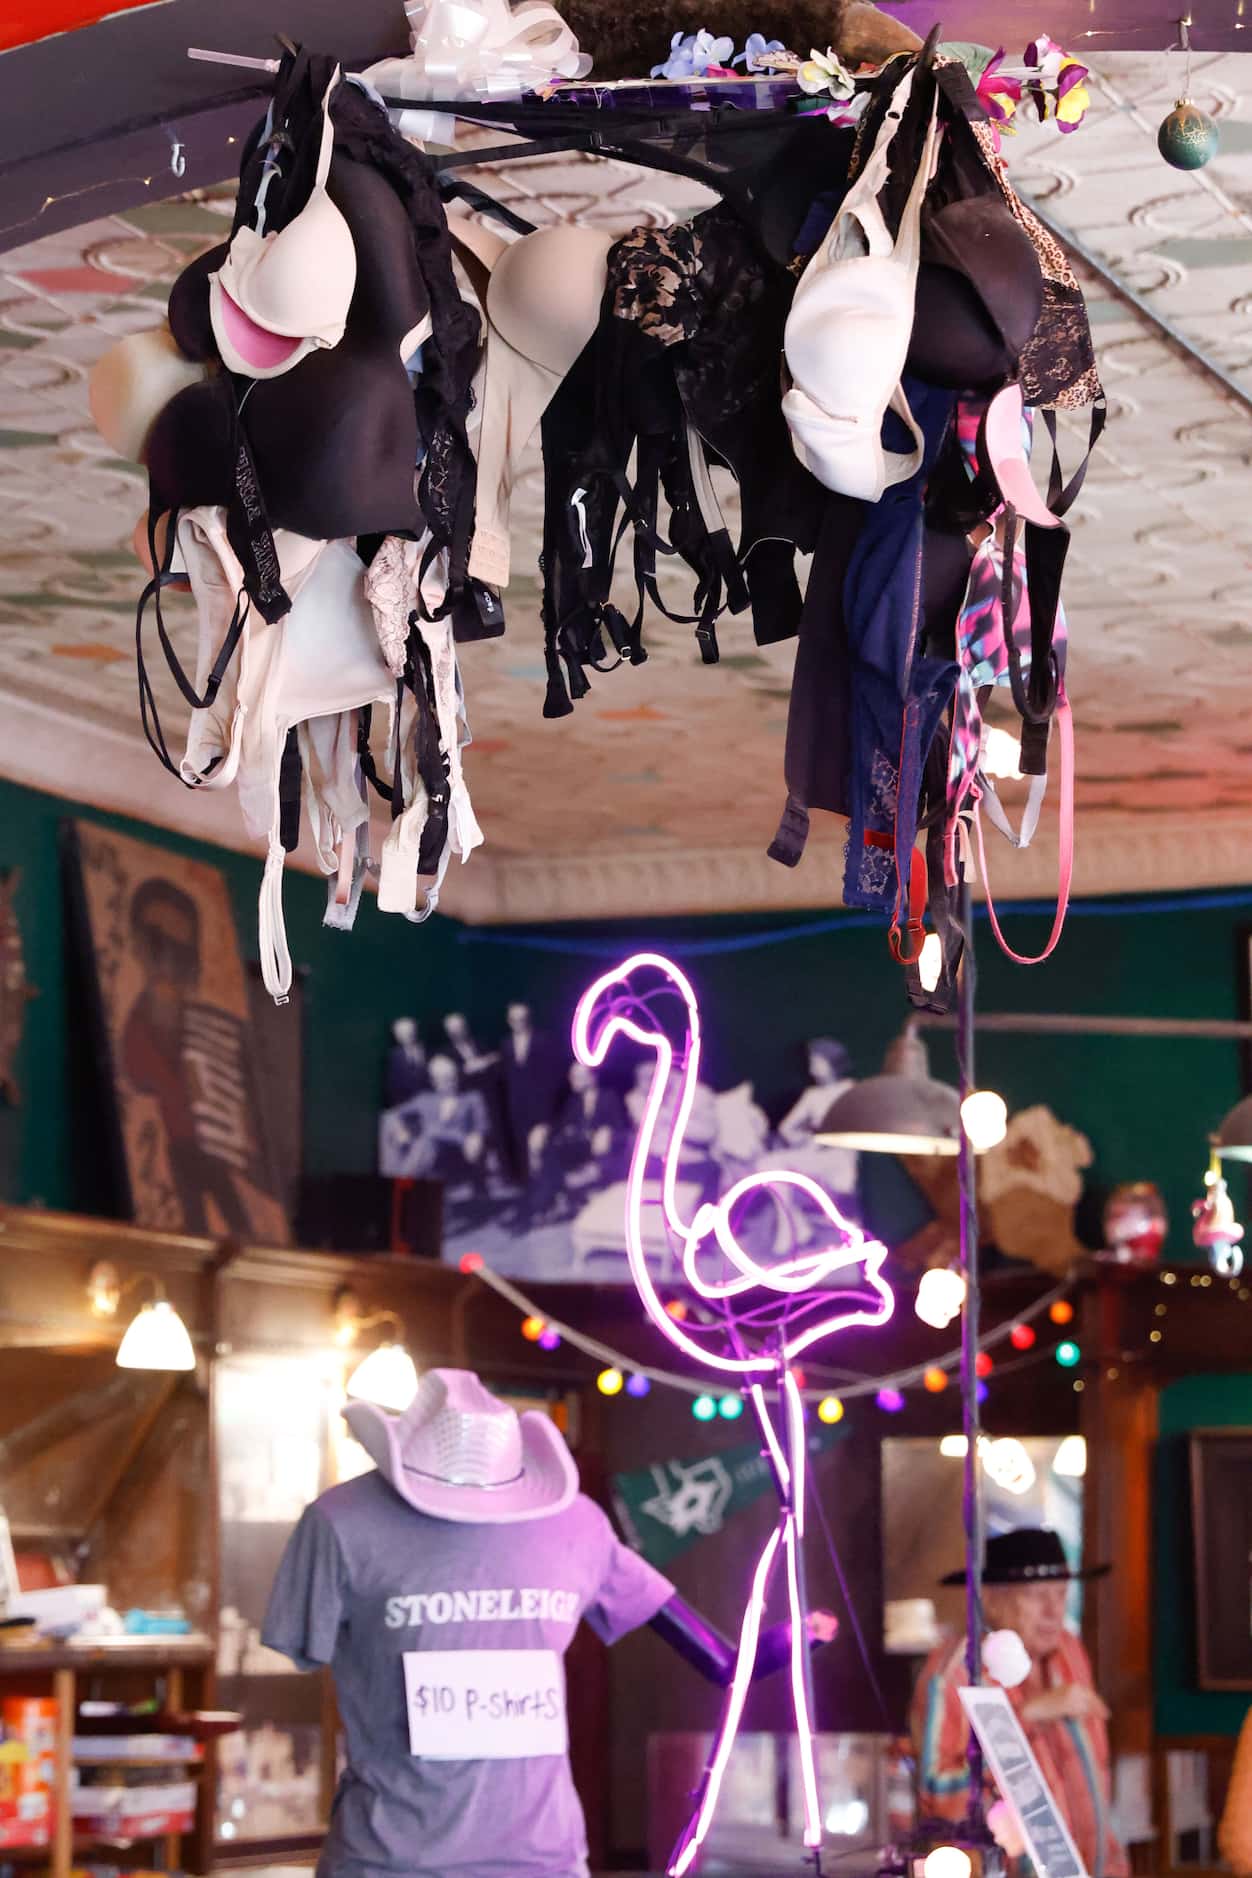 Owner Tom Garrison says he hates the bras hanging from the ceiling at the Stoneleigh P....